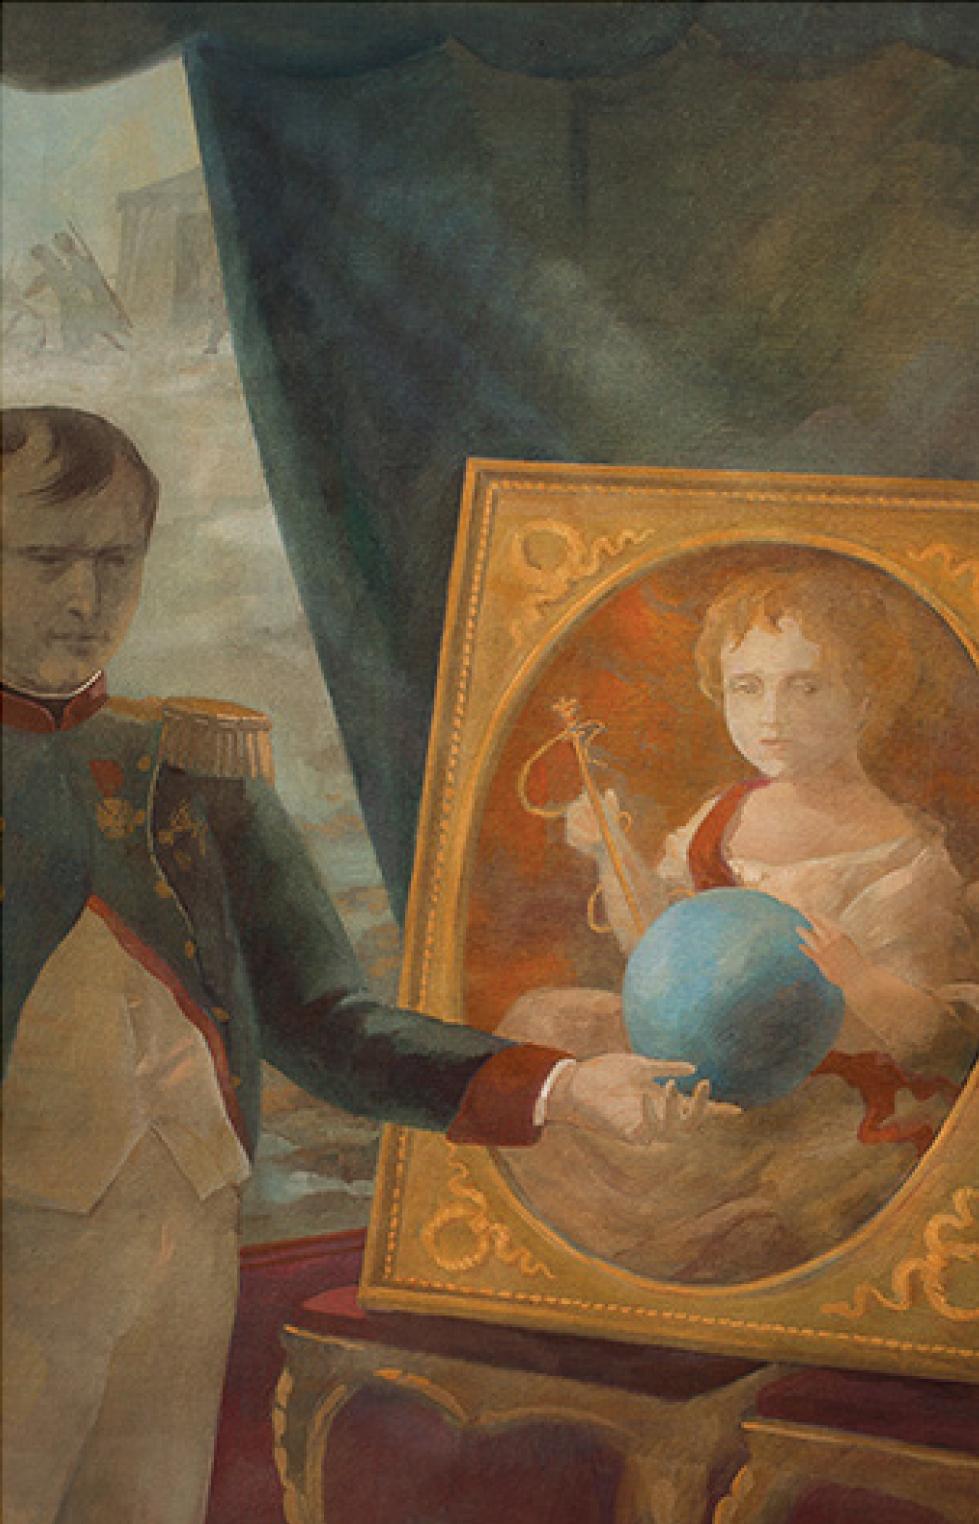 Napoleon and Portrait, Igor Karash, Original paintings, Gouache on Fabriano paper are available per special request; Print, 13.75"x21.5", Signed by Author, $175